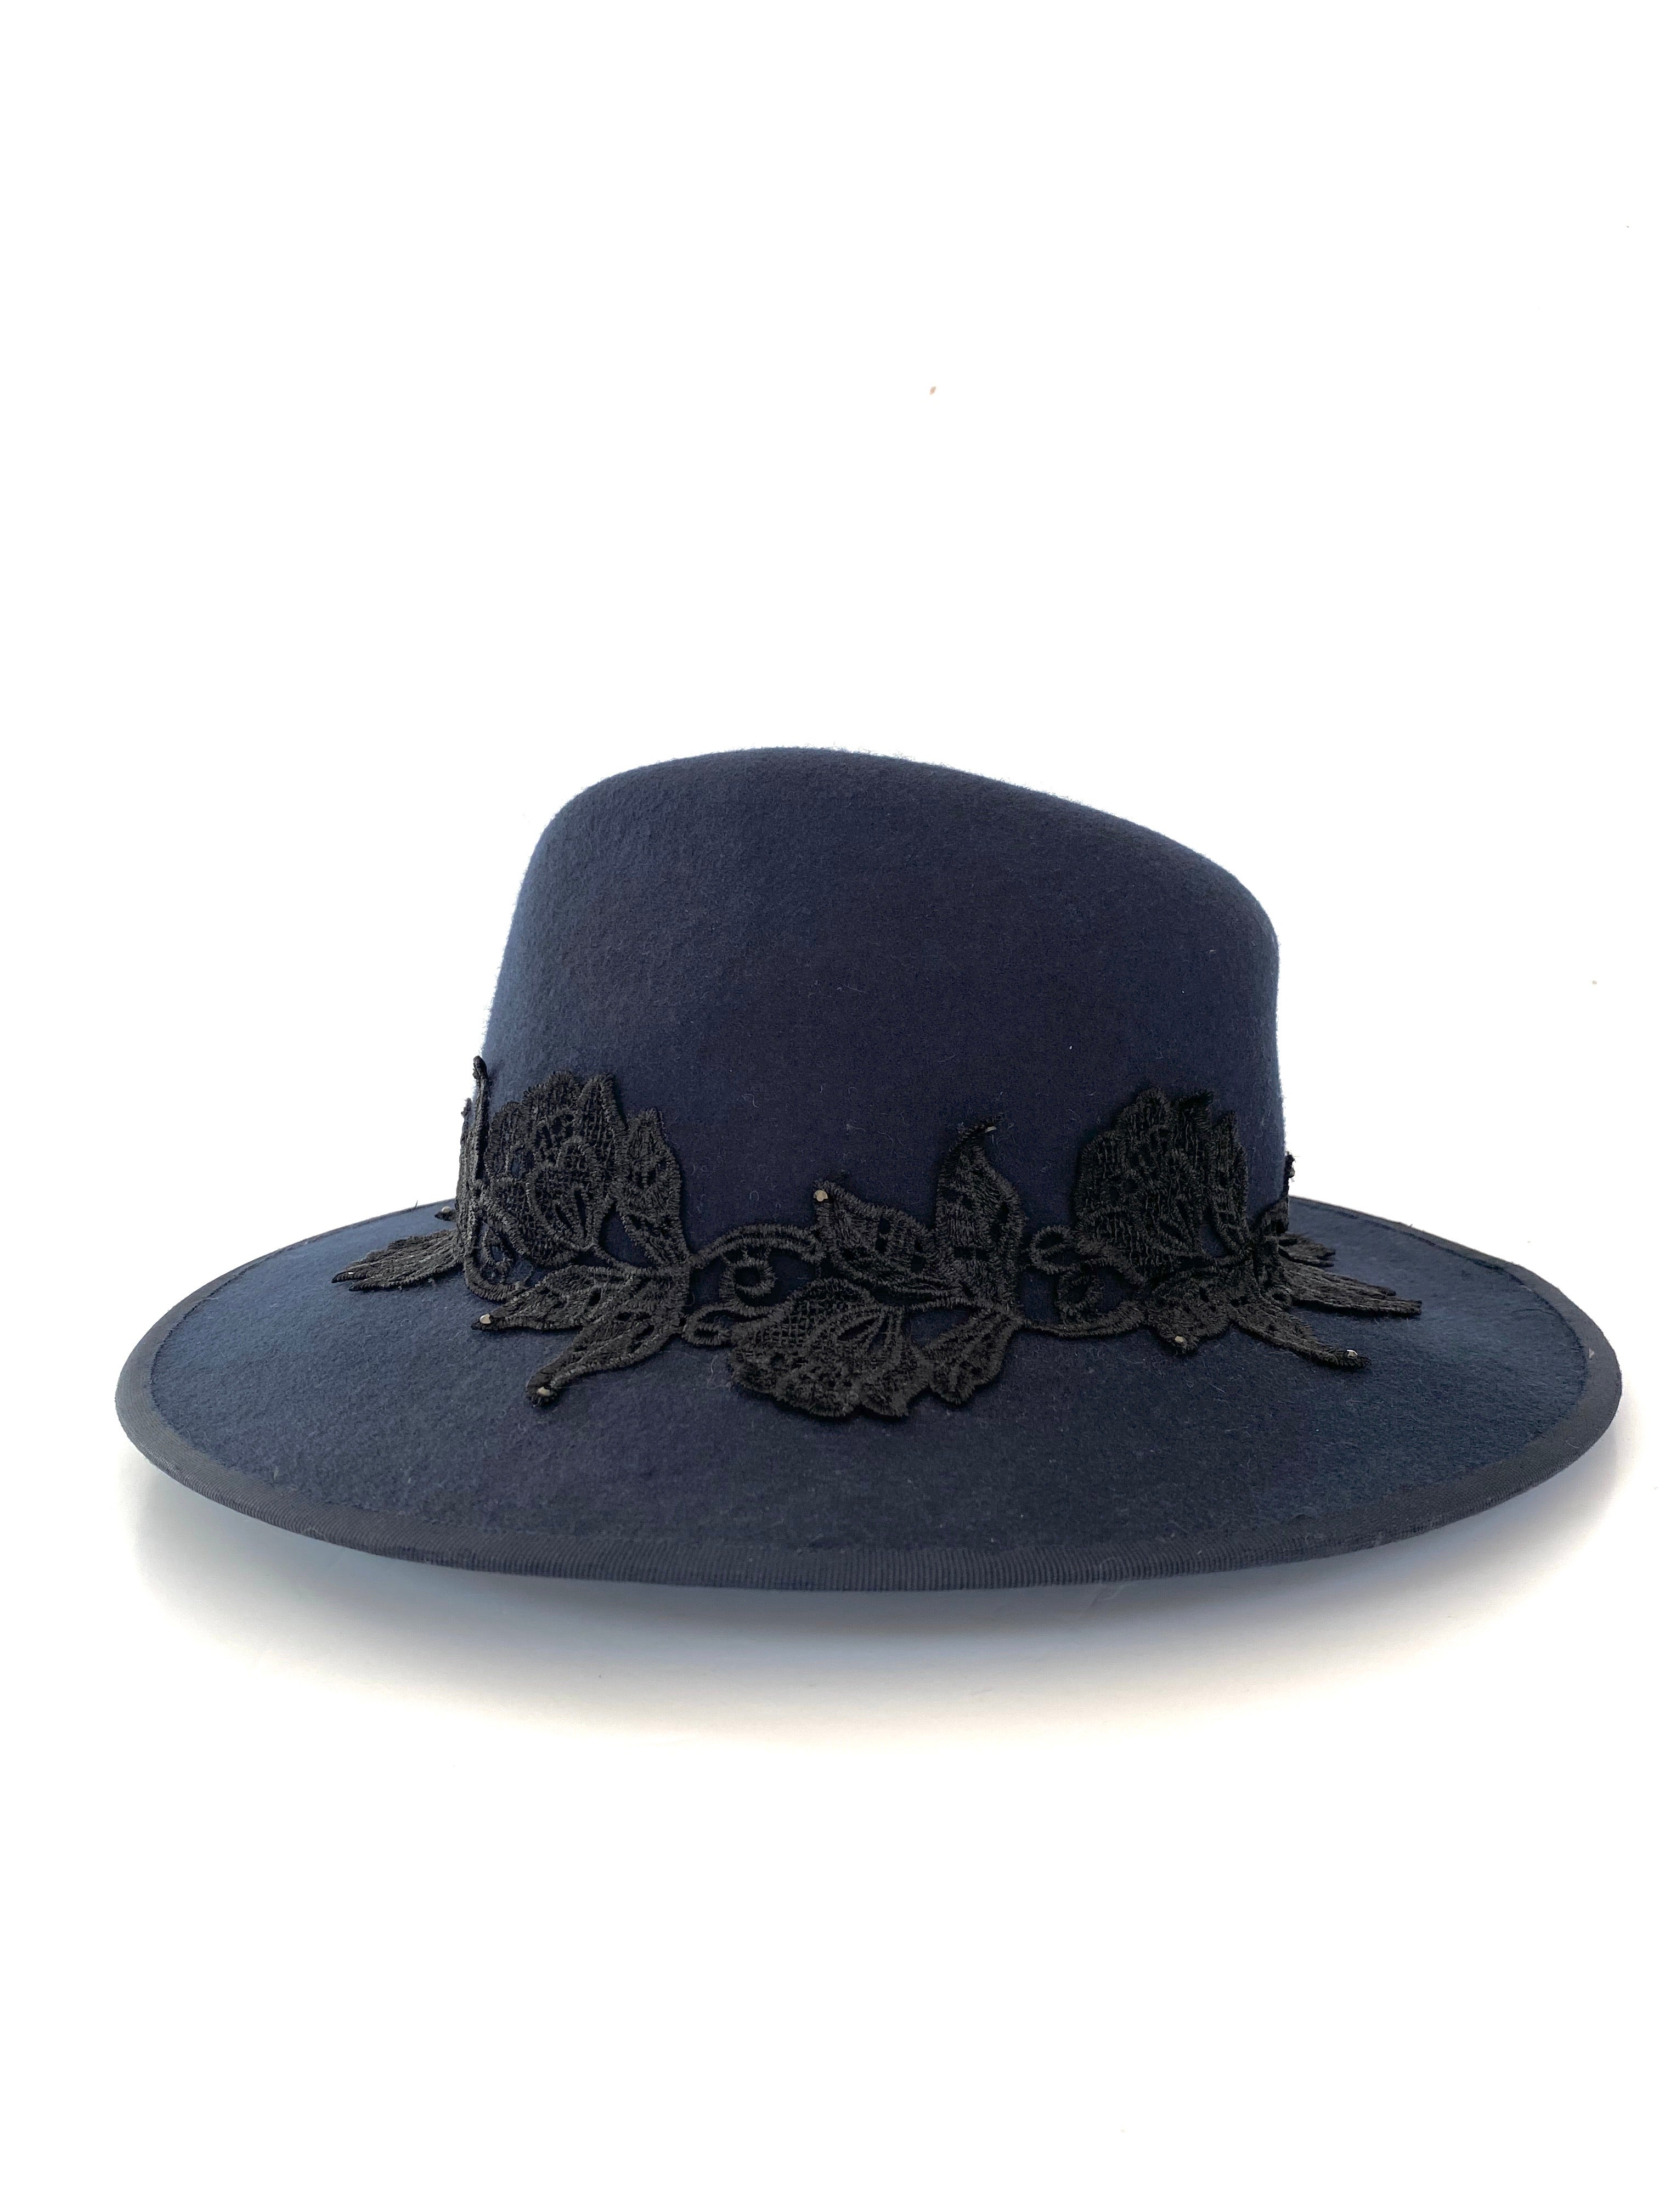 navy blue wool felt fedora hat, wide brimmed ladies winter hat with black lace band and tiny crystals